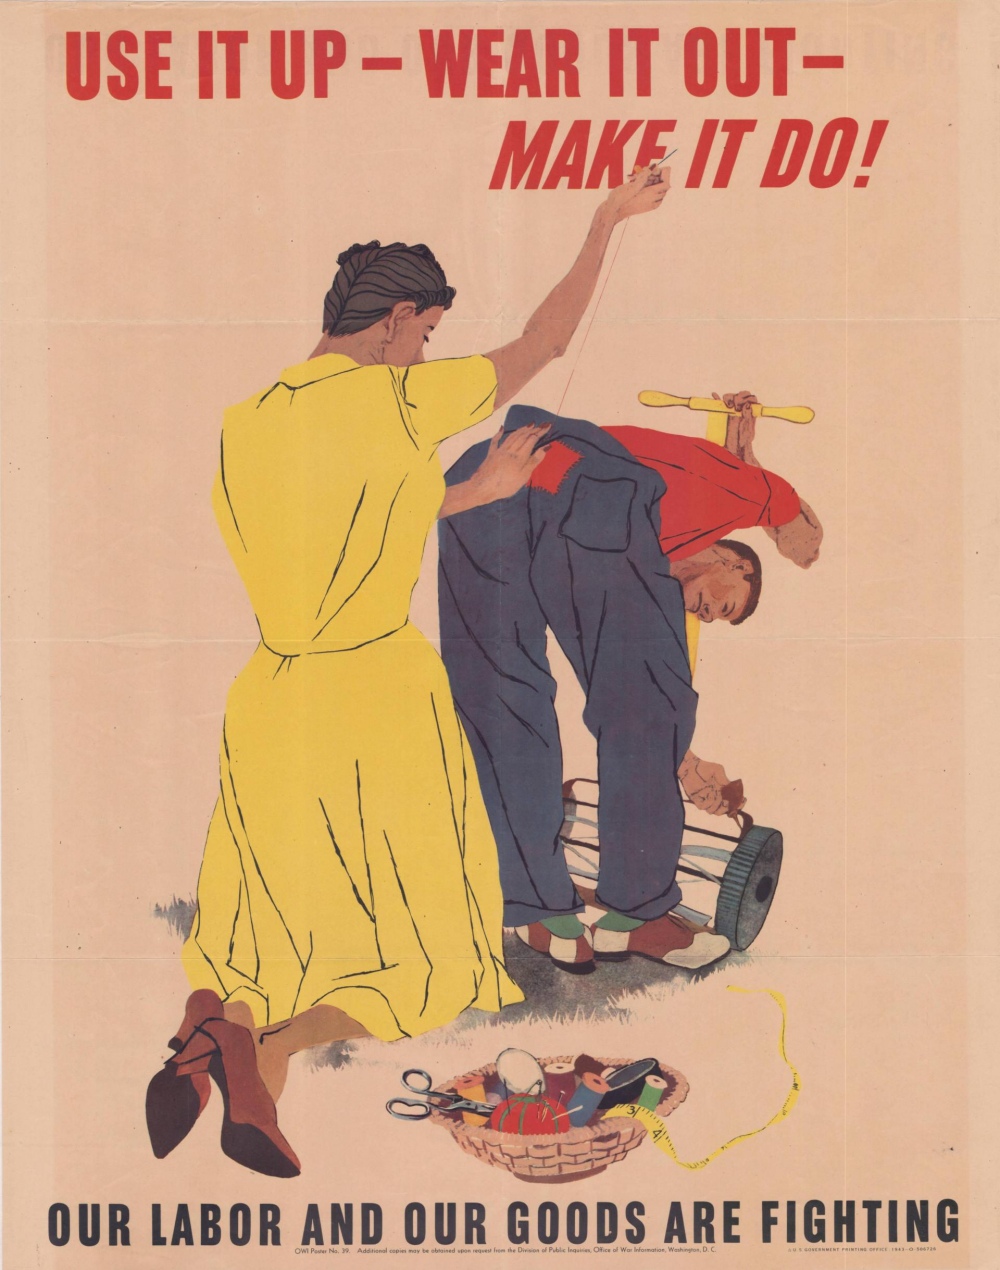 WWII poster on making the most of clothing